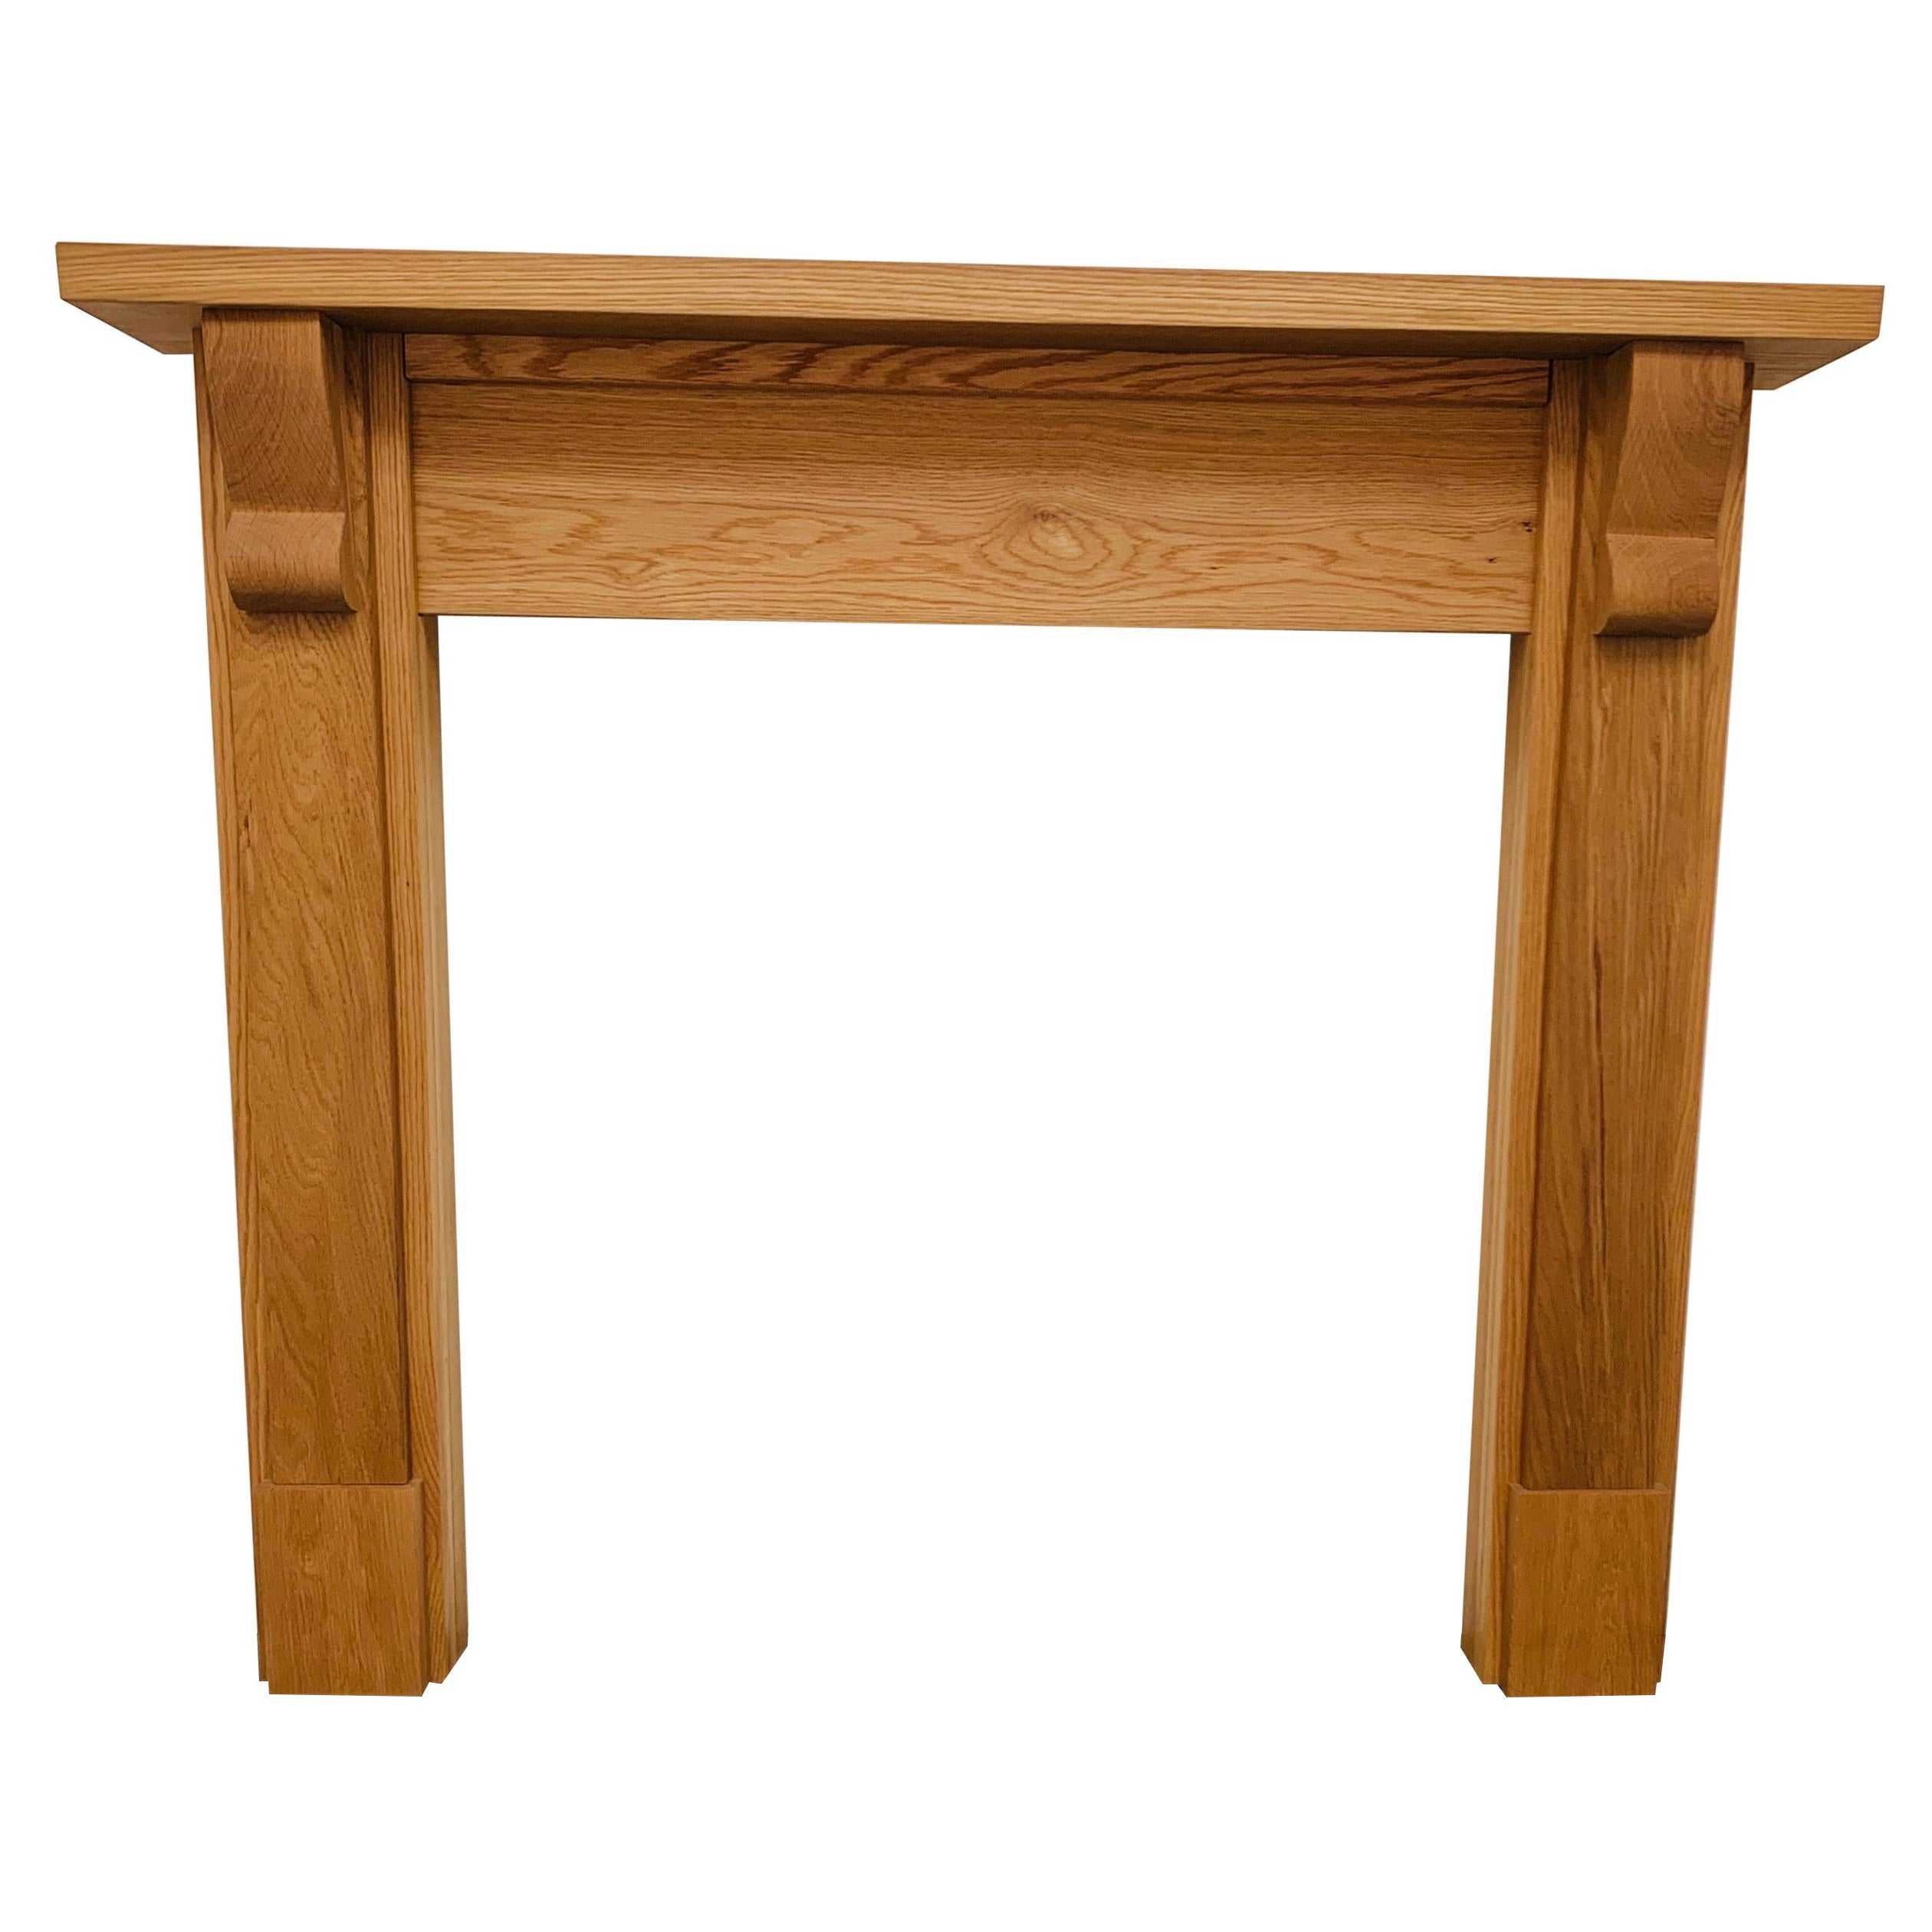 English Solid Oak Timber Fireplace Mantelpiece For Sale